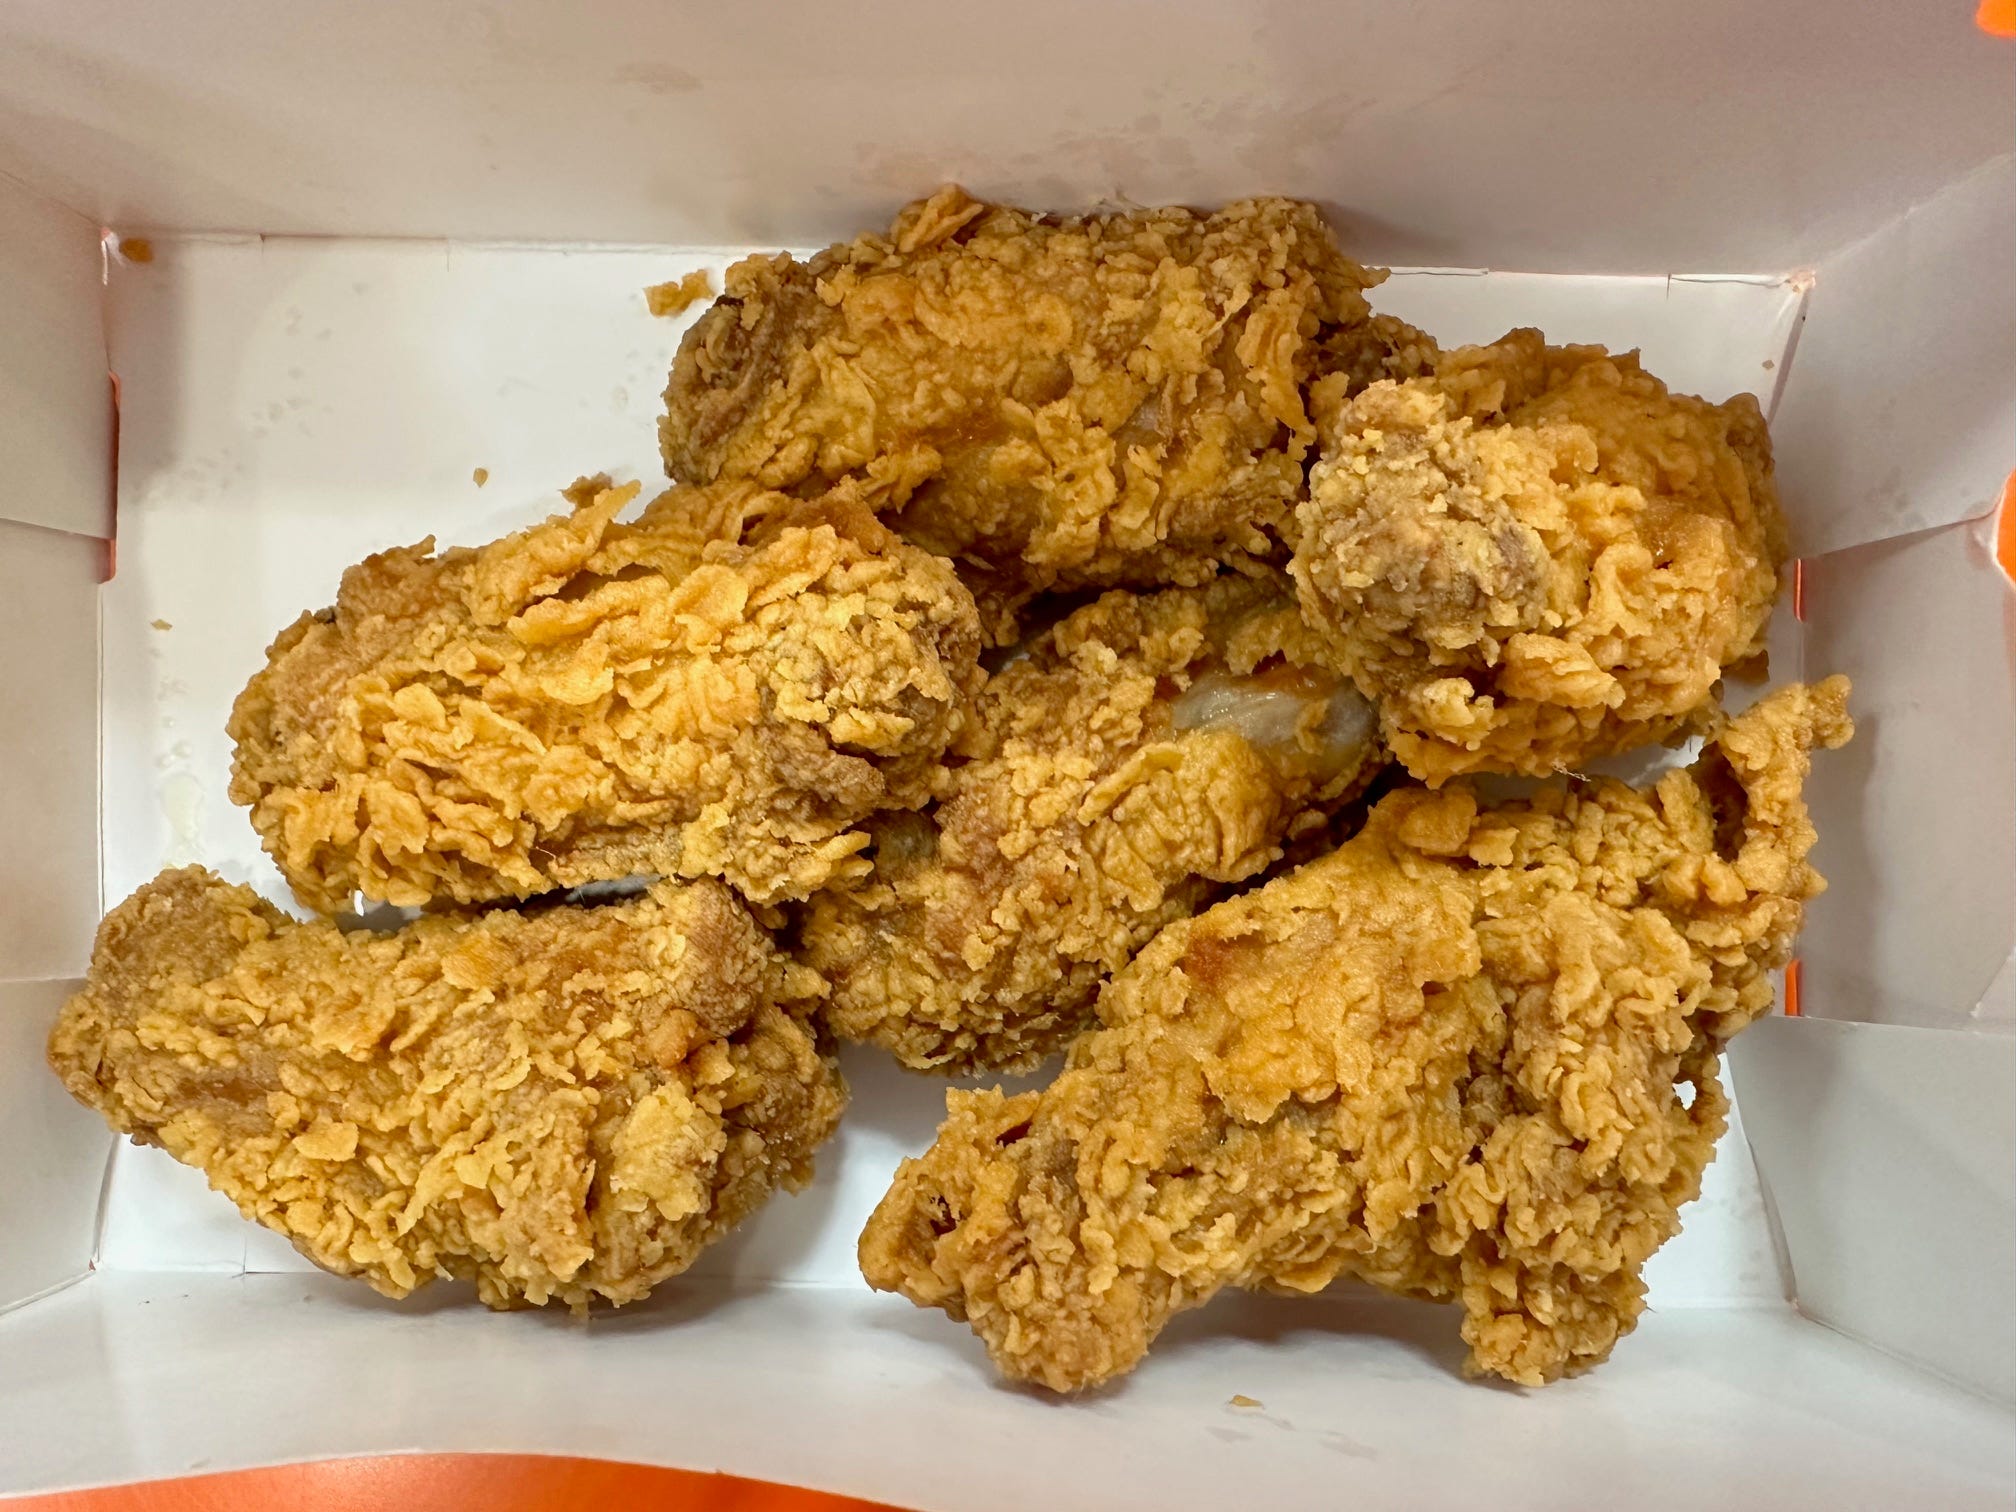 <p>Unlike the other wings, the Ghost Pepper wings are not slathered in any spicy sauce.</p><p>Instead, the flavor on this wing is in the actual chicken. The manager told me it was marinated for 12 hours in ghost pepper spices.</p><p>That explains why it didn't look intimidating. I was expecting a wing with hues of deep red or orange breading, indicators of spices blended into the outer coating. But the ghost pepper spices are not in the breading.</p><p>I was not intimidated by these wings at all. They were very approachable. But that's what made them a letdown. I couldn't taste any heat.</p><p>I would suggest eating these over the Roasted Garlic Parmesan wings if you're nervous about getting too much heat.</p>